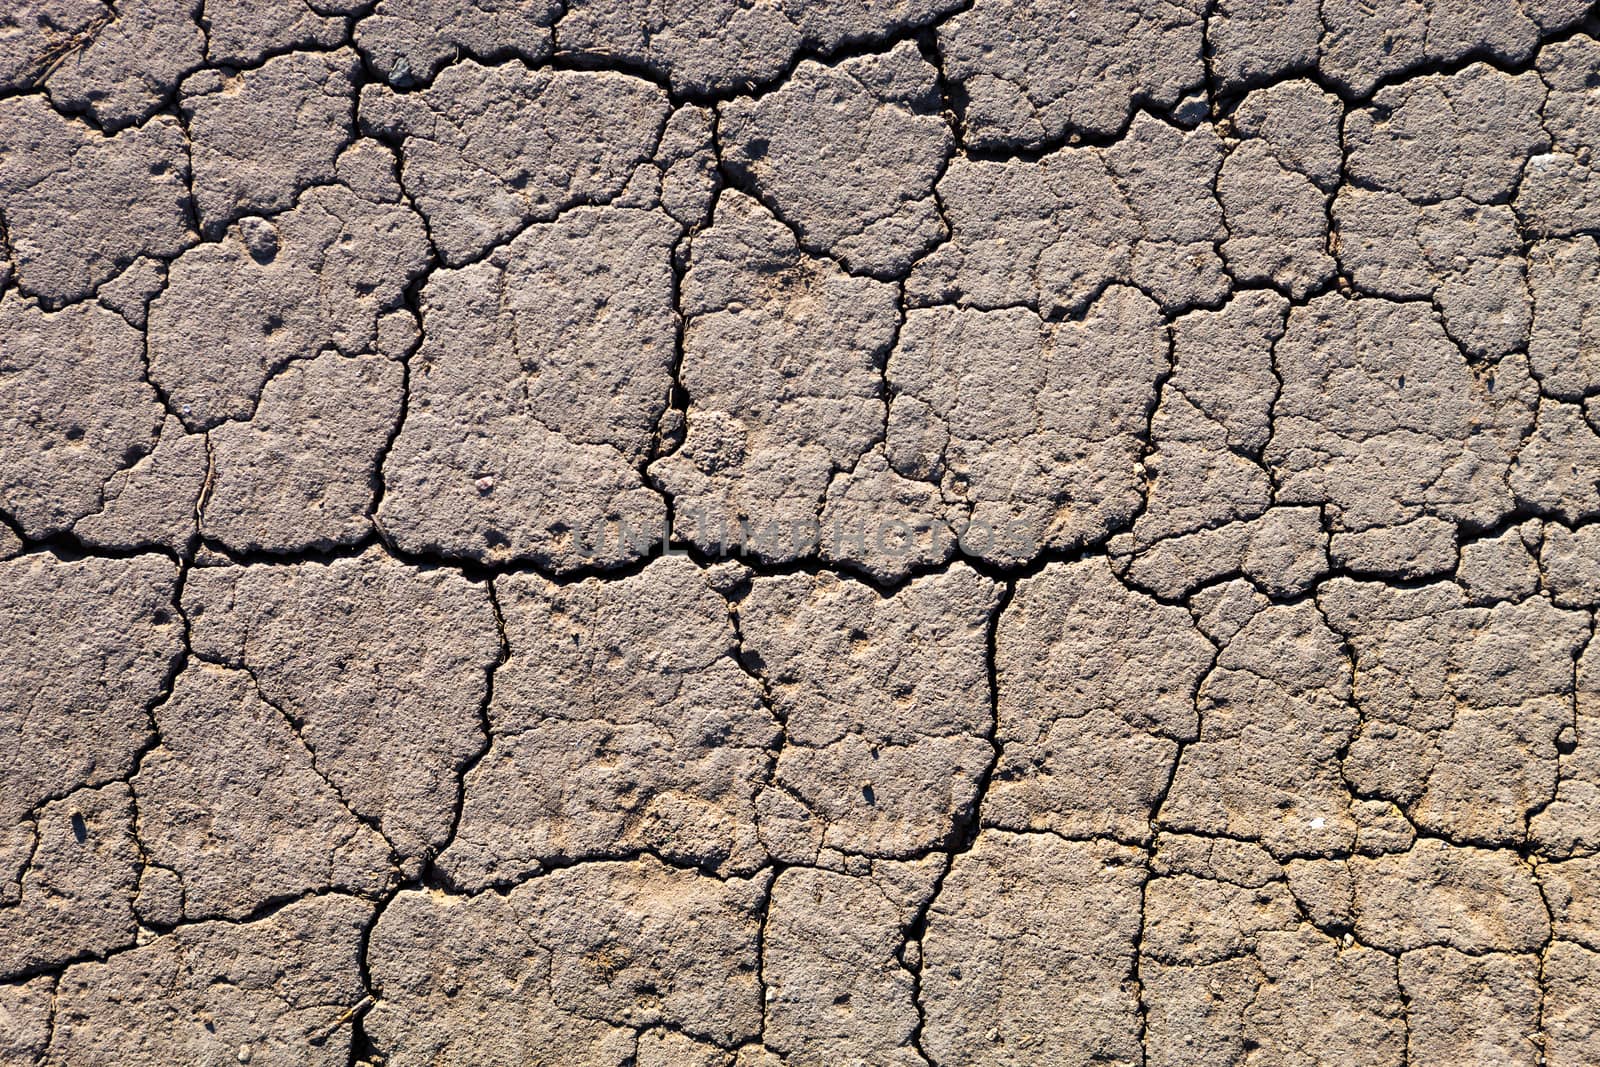 Cracked dry ground. Background or texture.